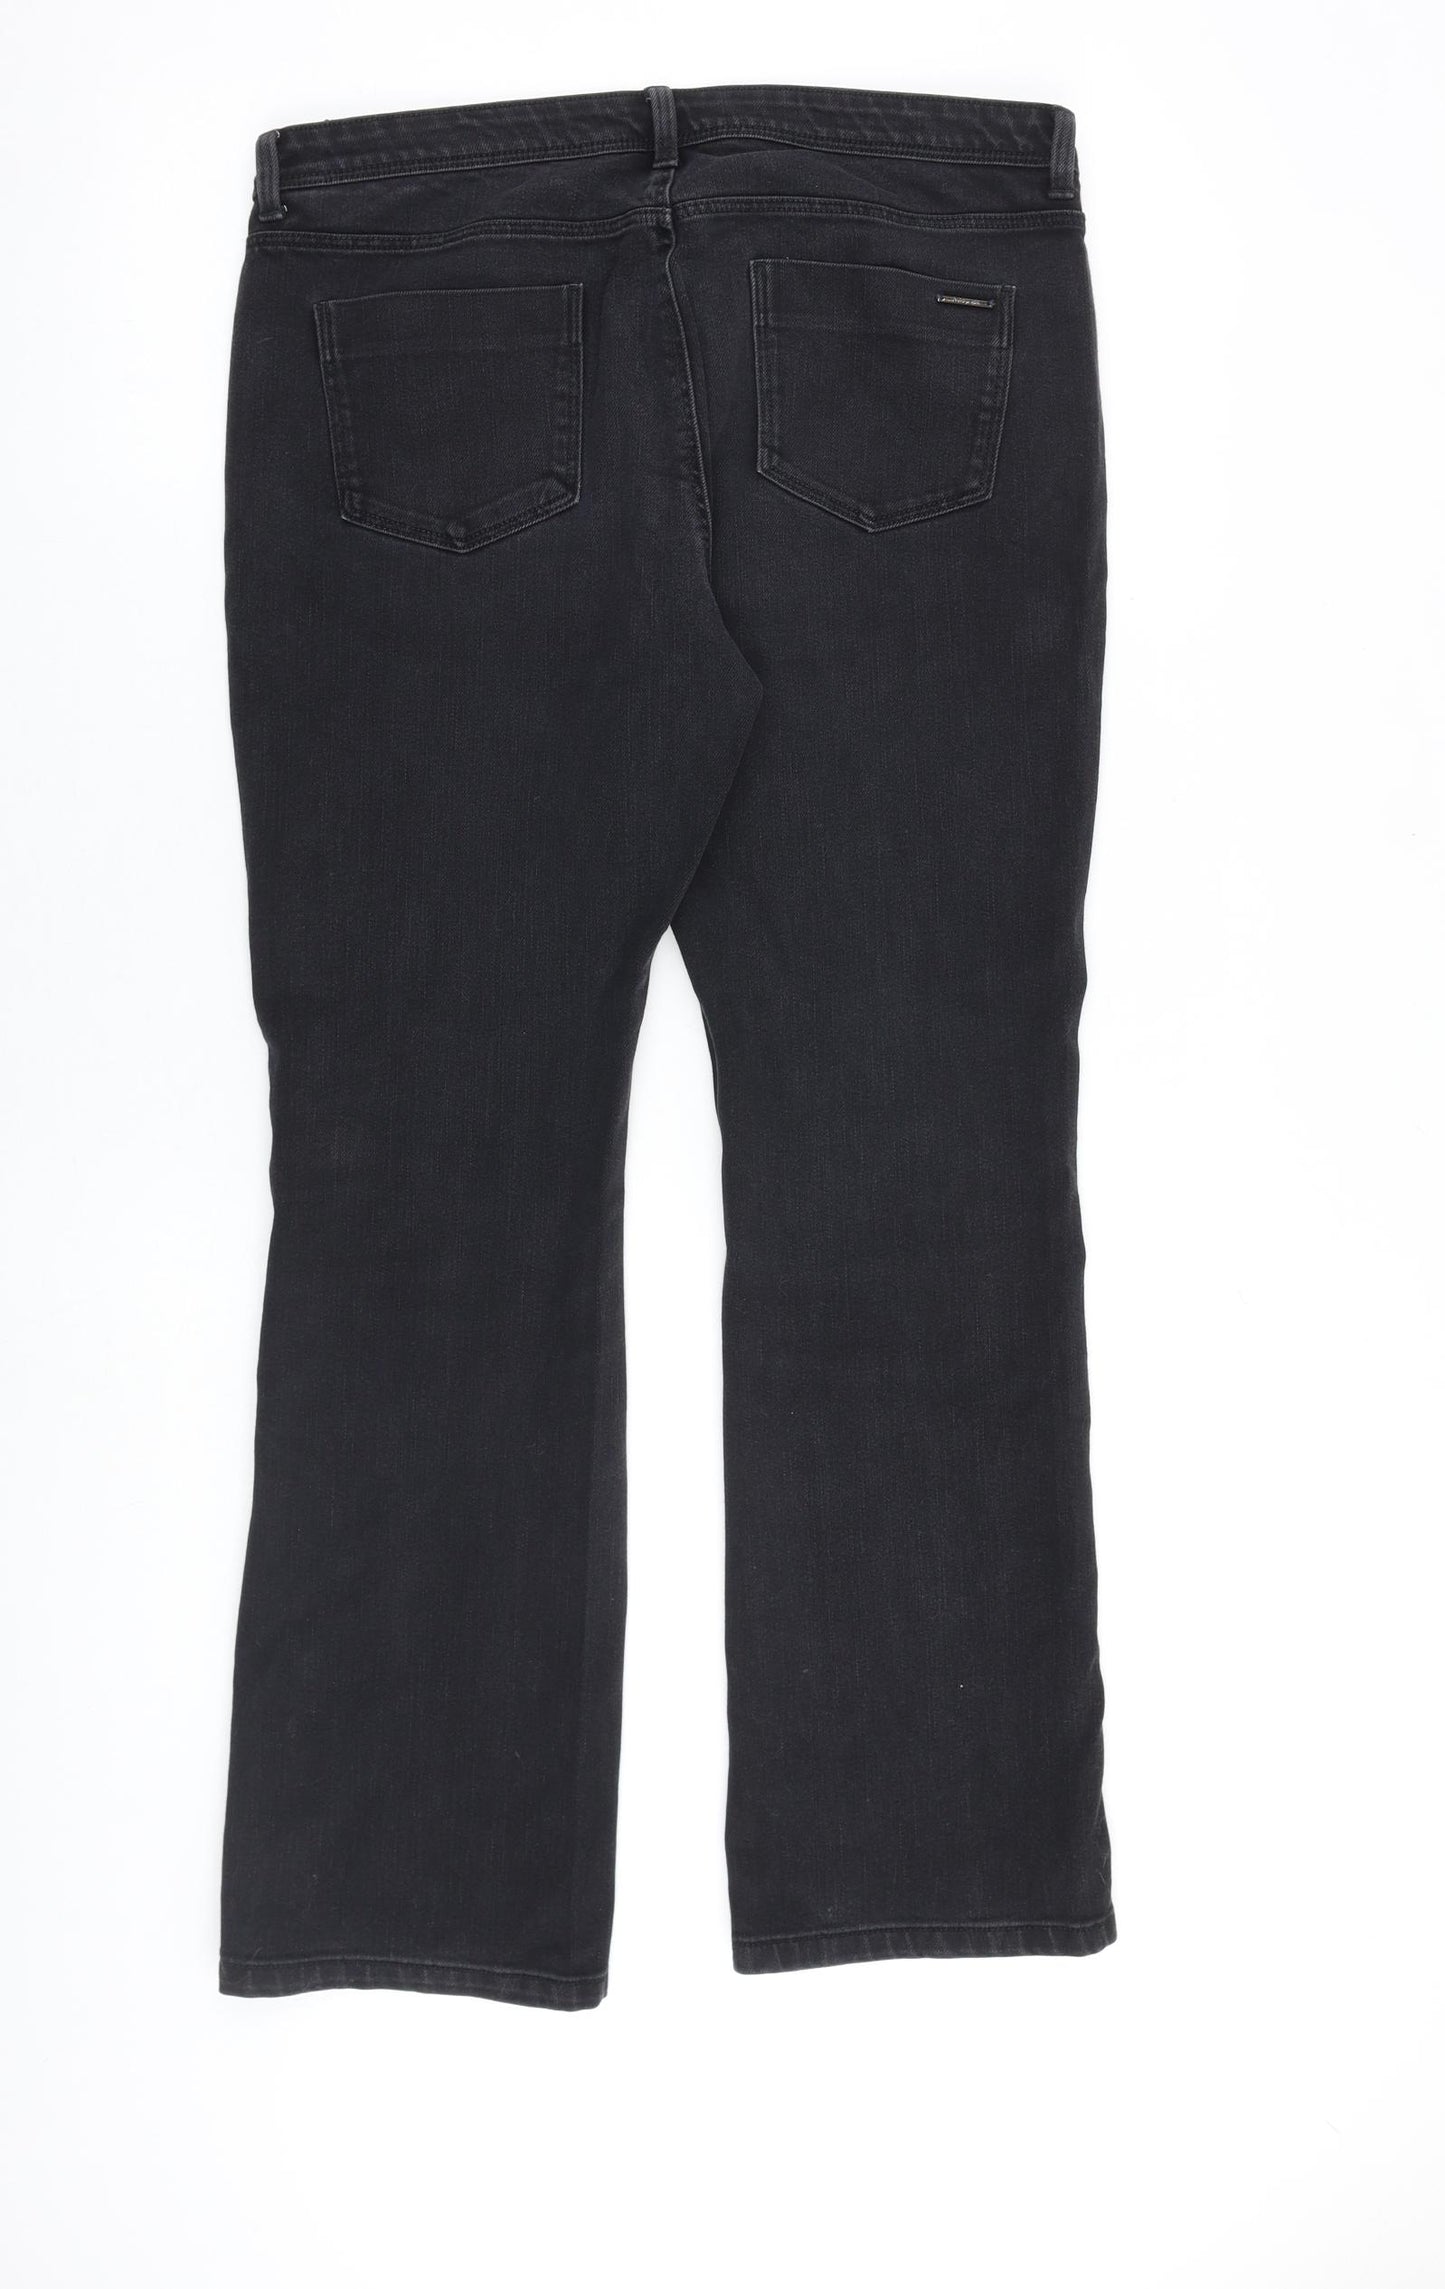 Marks and Spencer Womens Black Cotton Bootcut Jeans Size 14 L30 in Regular Zip